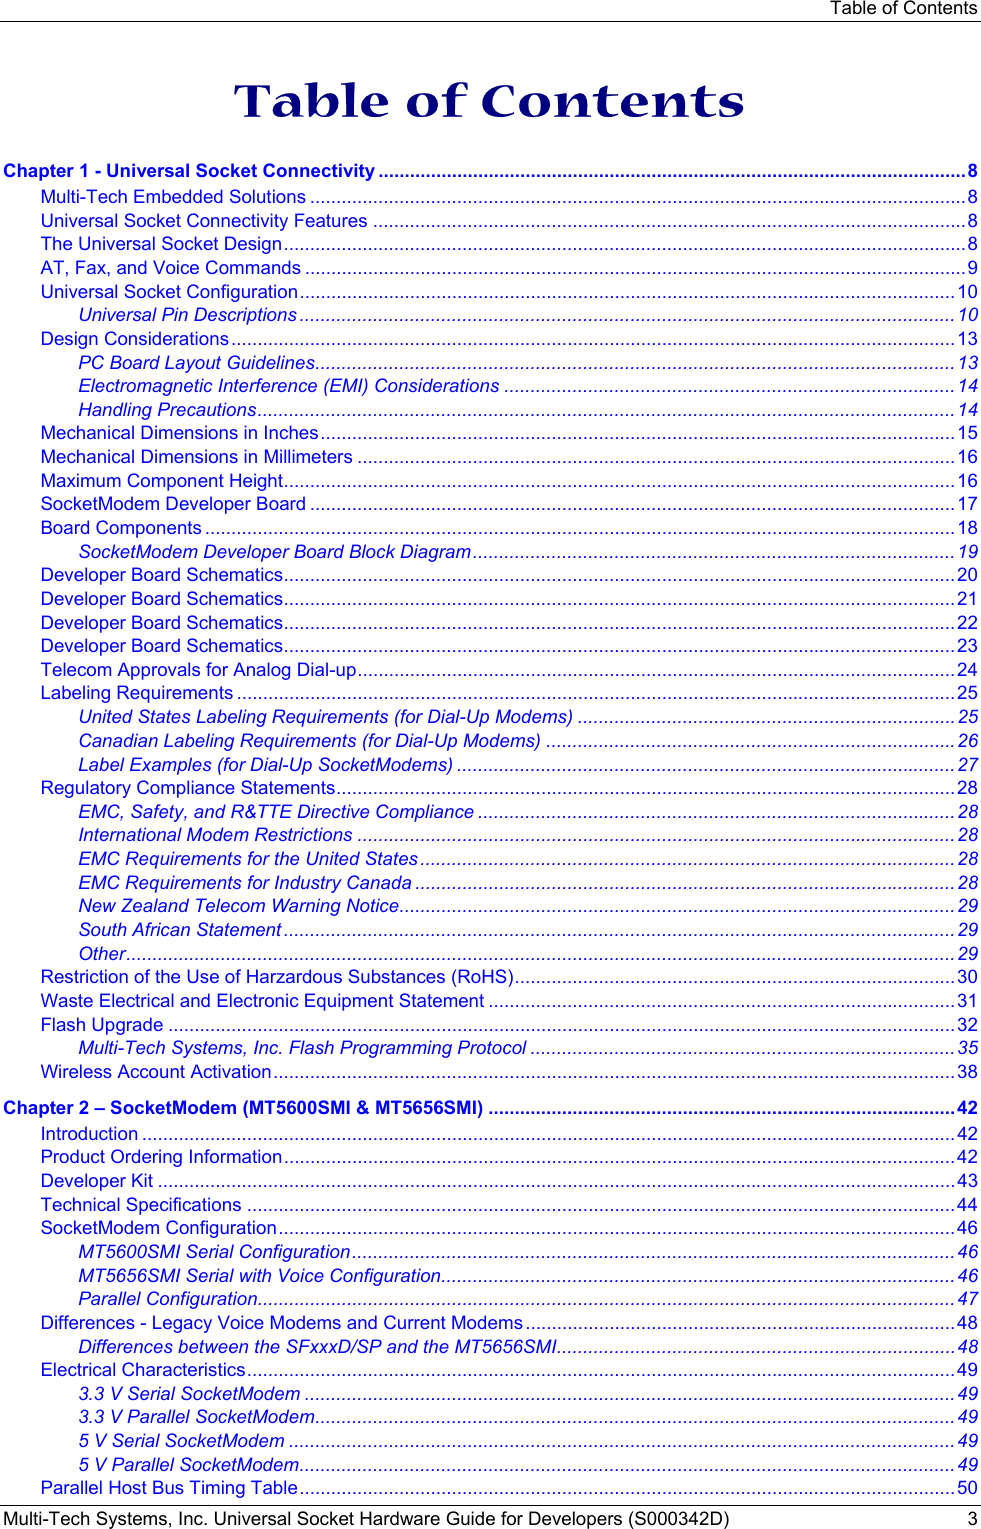 Table of Contents Multi-Tech Systems, Inc. Universal Socket Hardware Guide for Developers (S000342D)  3   Table of Contents Chapter 1 - Universal Socket Connectivity ................................................................................................................8 Multi-Tech Embedded Solutions .............................................................................................................................8 Universal Socket Connectivity Features .................................................................................................................8 The Universal Socket Design..................................................................................................................................8 AT, Fax, and Voice Commands ..............................................................................................................................9 Universal Socket Configuration.............................................................................................................................10 Universal Pin Descriptions .............................................................................................................................10 Design Considerations..........................................................................................................................................13 PC Board Layout Guidelines..........................................................................................................................13 Electromagnetic Interference (EMI) Considerations ......................................................................................14 Handling Precautions.....................................................................................................................................14 Mechanical Dimensions in Inches.........................................................................................................................15 Mechanical Dimensions in Millimeters ..................................................................................................................16 Maximum Component Height................................................................................................................................16 SocketModem Developer Board ...........................................................................................................................17 Board Components ...............................................................................................................................................18 SocketModem Developer Board Block Diagram............................................................................................19 Developer Board Schematics................................................................................................................................20 Developer Board Schematics................................................................................................................................21 Developer Board Schematics................................................................................................................................22 Developer Board Schematics................................................................................................................................23 Telecom Approvals for Analog Dial-up..................................................................................................................24 Labeling Requirements .........................................................................................................................................25 United States Labeling Requirements (for Dial-Up Modems) ........................................................................25 Canadian Labeling Requirements (for Dial-Up Modems) ..............................................................................26 Label Examples (for Dial-Up SocketModems) ...............................................................................................27 Regulatory Compliance Statements......................................................................................................................28 EMC, Safety, and R&amp;TTE Directive Compliance ...........................................................................................28 International Modem Restrictions ..................................................................................................................28 EMC Requirements for the United States......................................................................................................28 EMC Requirements for Industry Canada .......................................................................................................28 New Zealand Telecom Warning Notice..........................................................................................................29 South African Statement ................................................................................................................................29 Other..............................................................................................................................................................29 Restriction of the Use of Harzardous Substances (RoHS)....................................................................................30 Waste Electrical and Electronic Equipment Statement .........................................................................................31 Flash Upgrade ......................................................................................................................................................32 Multi-Tech Systems, Inc. Flash Programming Protocol .................................................................................35 Wireless Account Activation..................................................................................................................................38 Chapter 2 – SocketModem (MT5600SMI &amp; MT5656SMI) .........................................................................................42 Introduction ...........................................................................................................................................................42 Product Ordering Information................................................................................................................................42 Developer Kit ........................................................................................................................................................43 Technical Specifications .......................................................................................................................................44 SocketModem Configuration.................................................................................................................................46 MT5600SMI Serial Configuration...................................................................................................................46 MT5656SMI Serial with Voice Configuration..................................................................................................46 Parallel Configuration.....................................................................................................................................47 Differences - Legacy Voice Modems and Current Modems ..................................................................................48 Differences between the SFxxxD/SP and the MT5656SMI............................................................................48 Electrical Characteristics.......................................................................................................................................49 3.3 V Serial SocketModem ............................................................................................................................49 3.3 V Parallel SocketModem..........................................................................................................................49 5 V Serial SocketModem ...............................................................................................................................49 5 V Parallel SocketModem.............................................................................................................................49 Parallel Host Bus Timing Table.............................................................................................................................50 